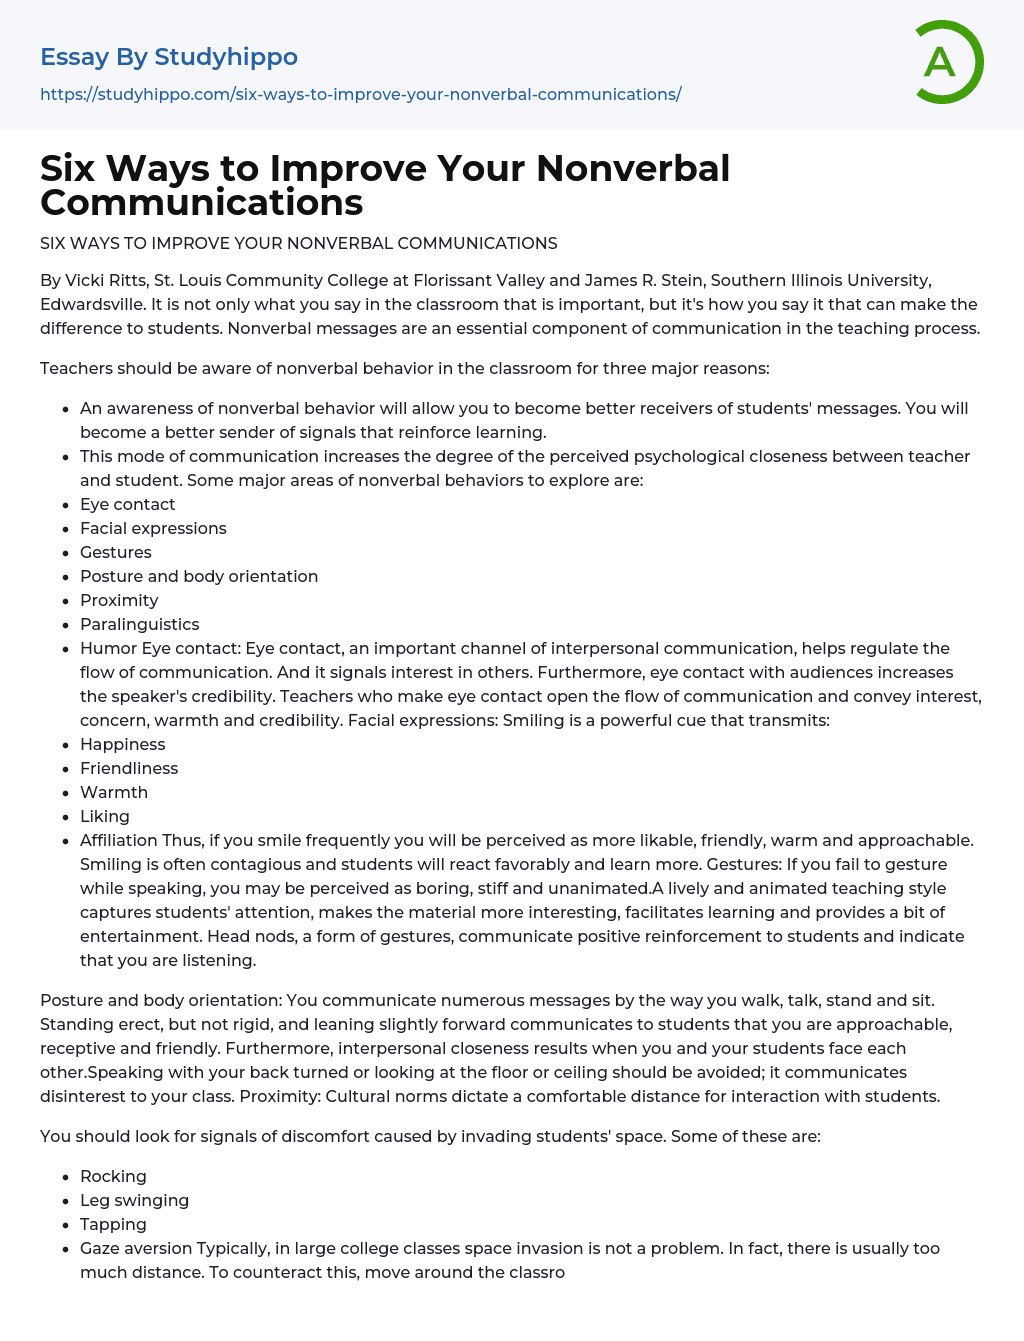 Six Ways to Improve Your Nonverbal Communications Essay Example